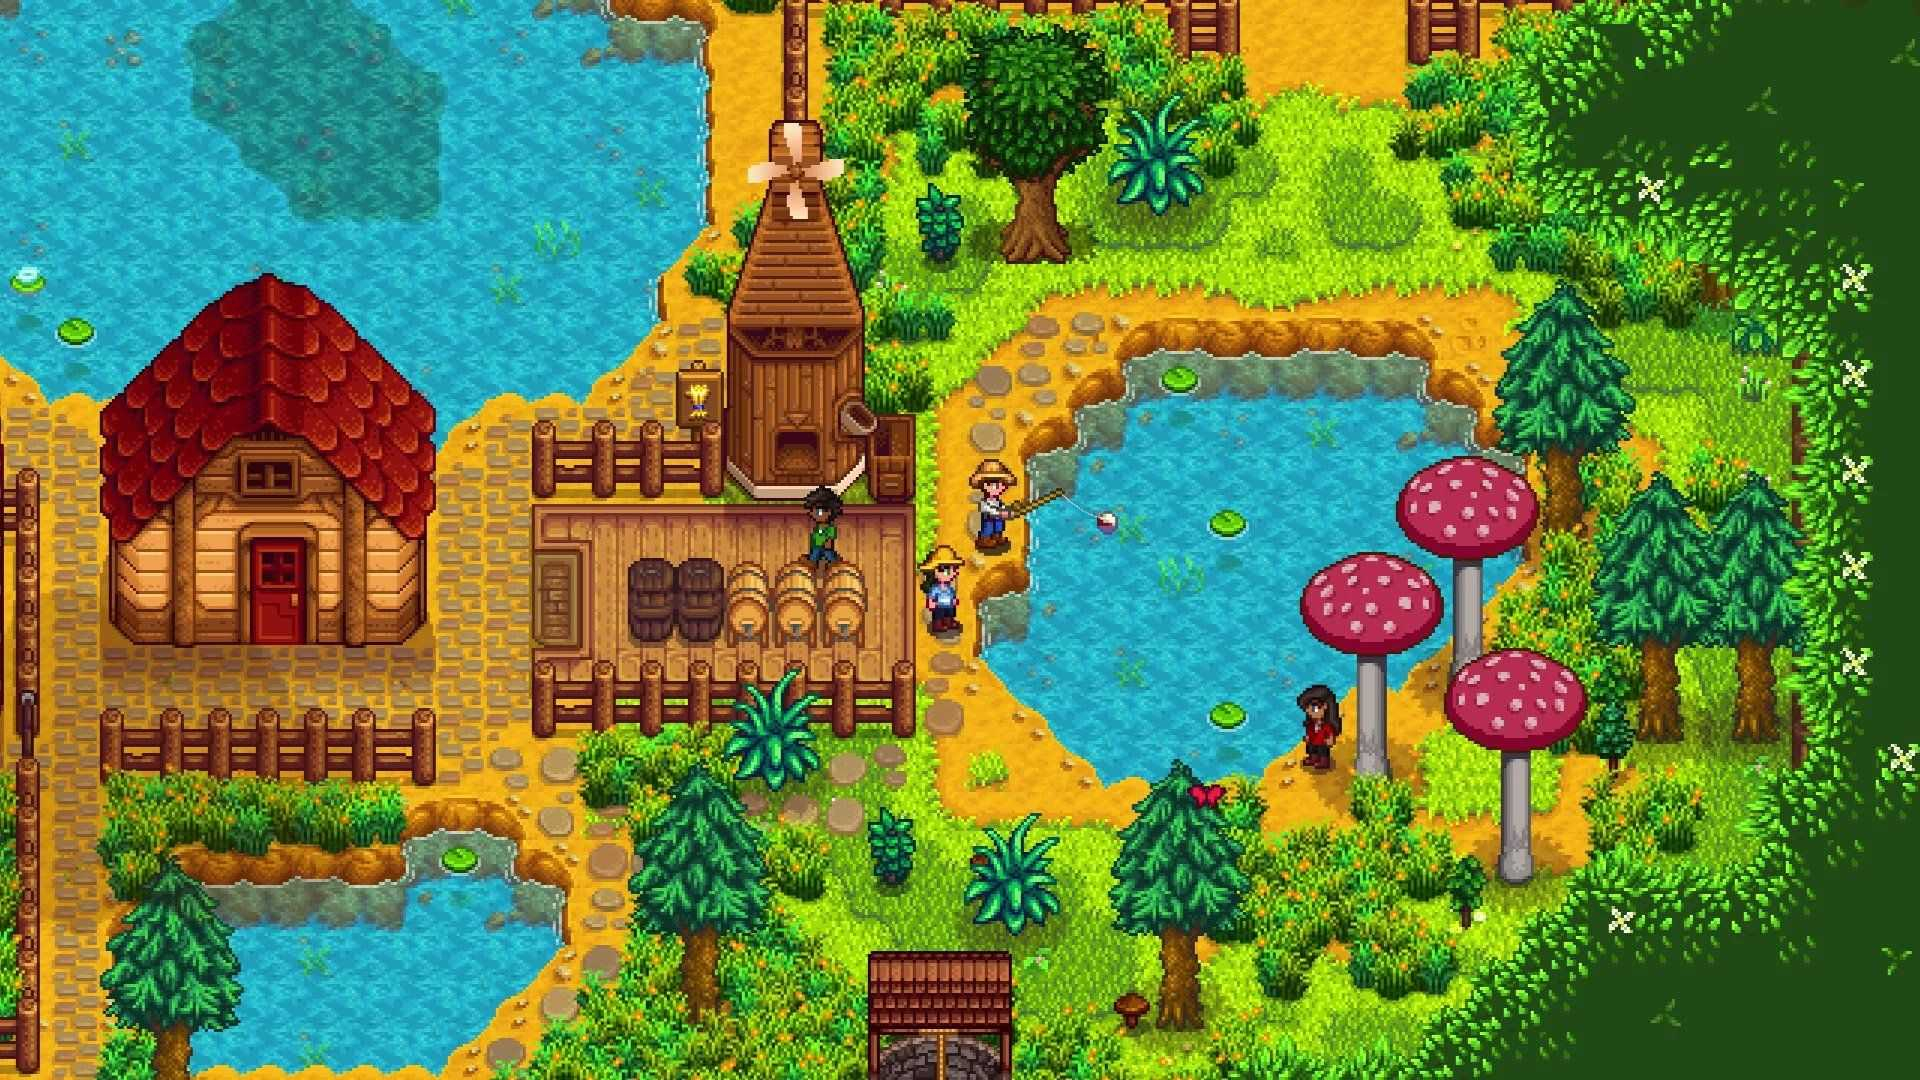 1920x1080 Wallpaper Stardew Valley Awesome Free HD Wallpapers